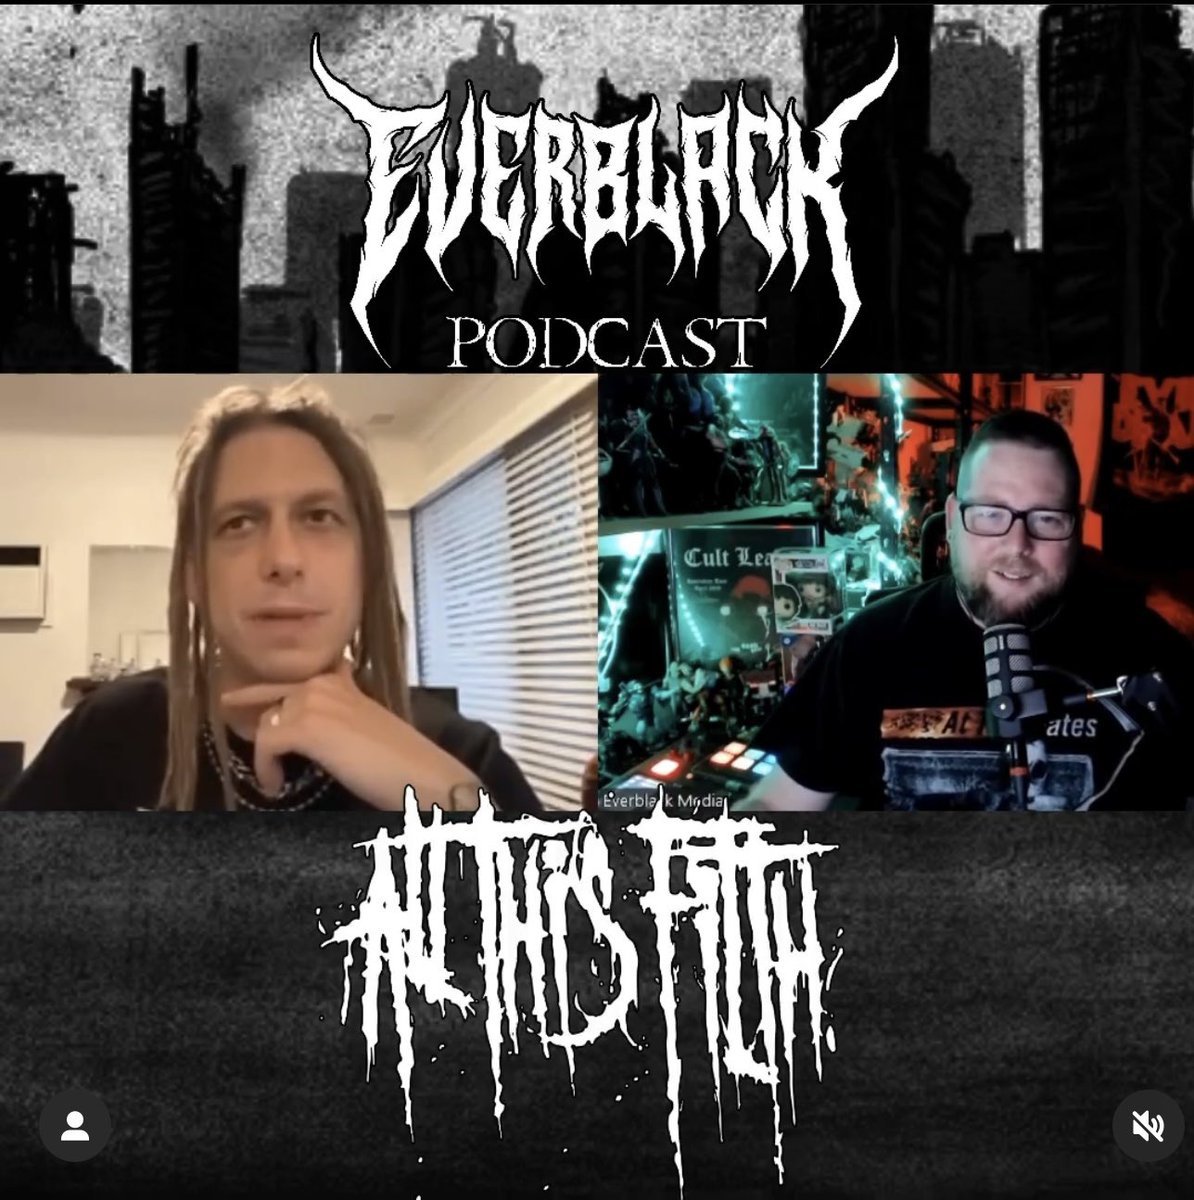 ICYMI, don’t forget to check out Brendan’s chat with Jai from Everblack Podcast. They chatted about the latest album, opening for Machine Head and Fear Factory, love of industrial metal, future plans and more! Watch the full interview on the Everblack Youlube channel